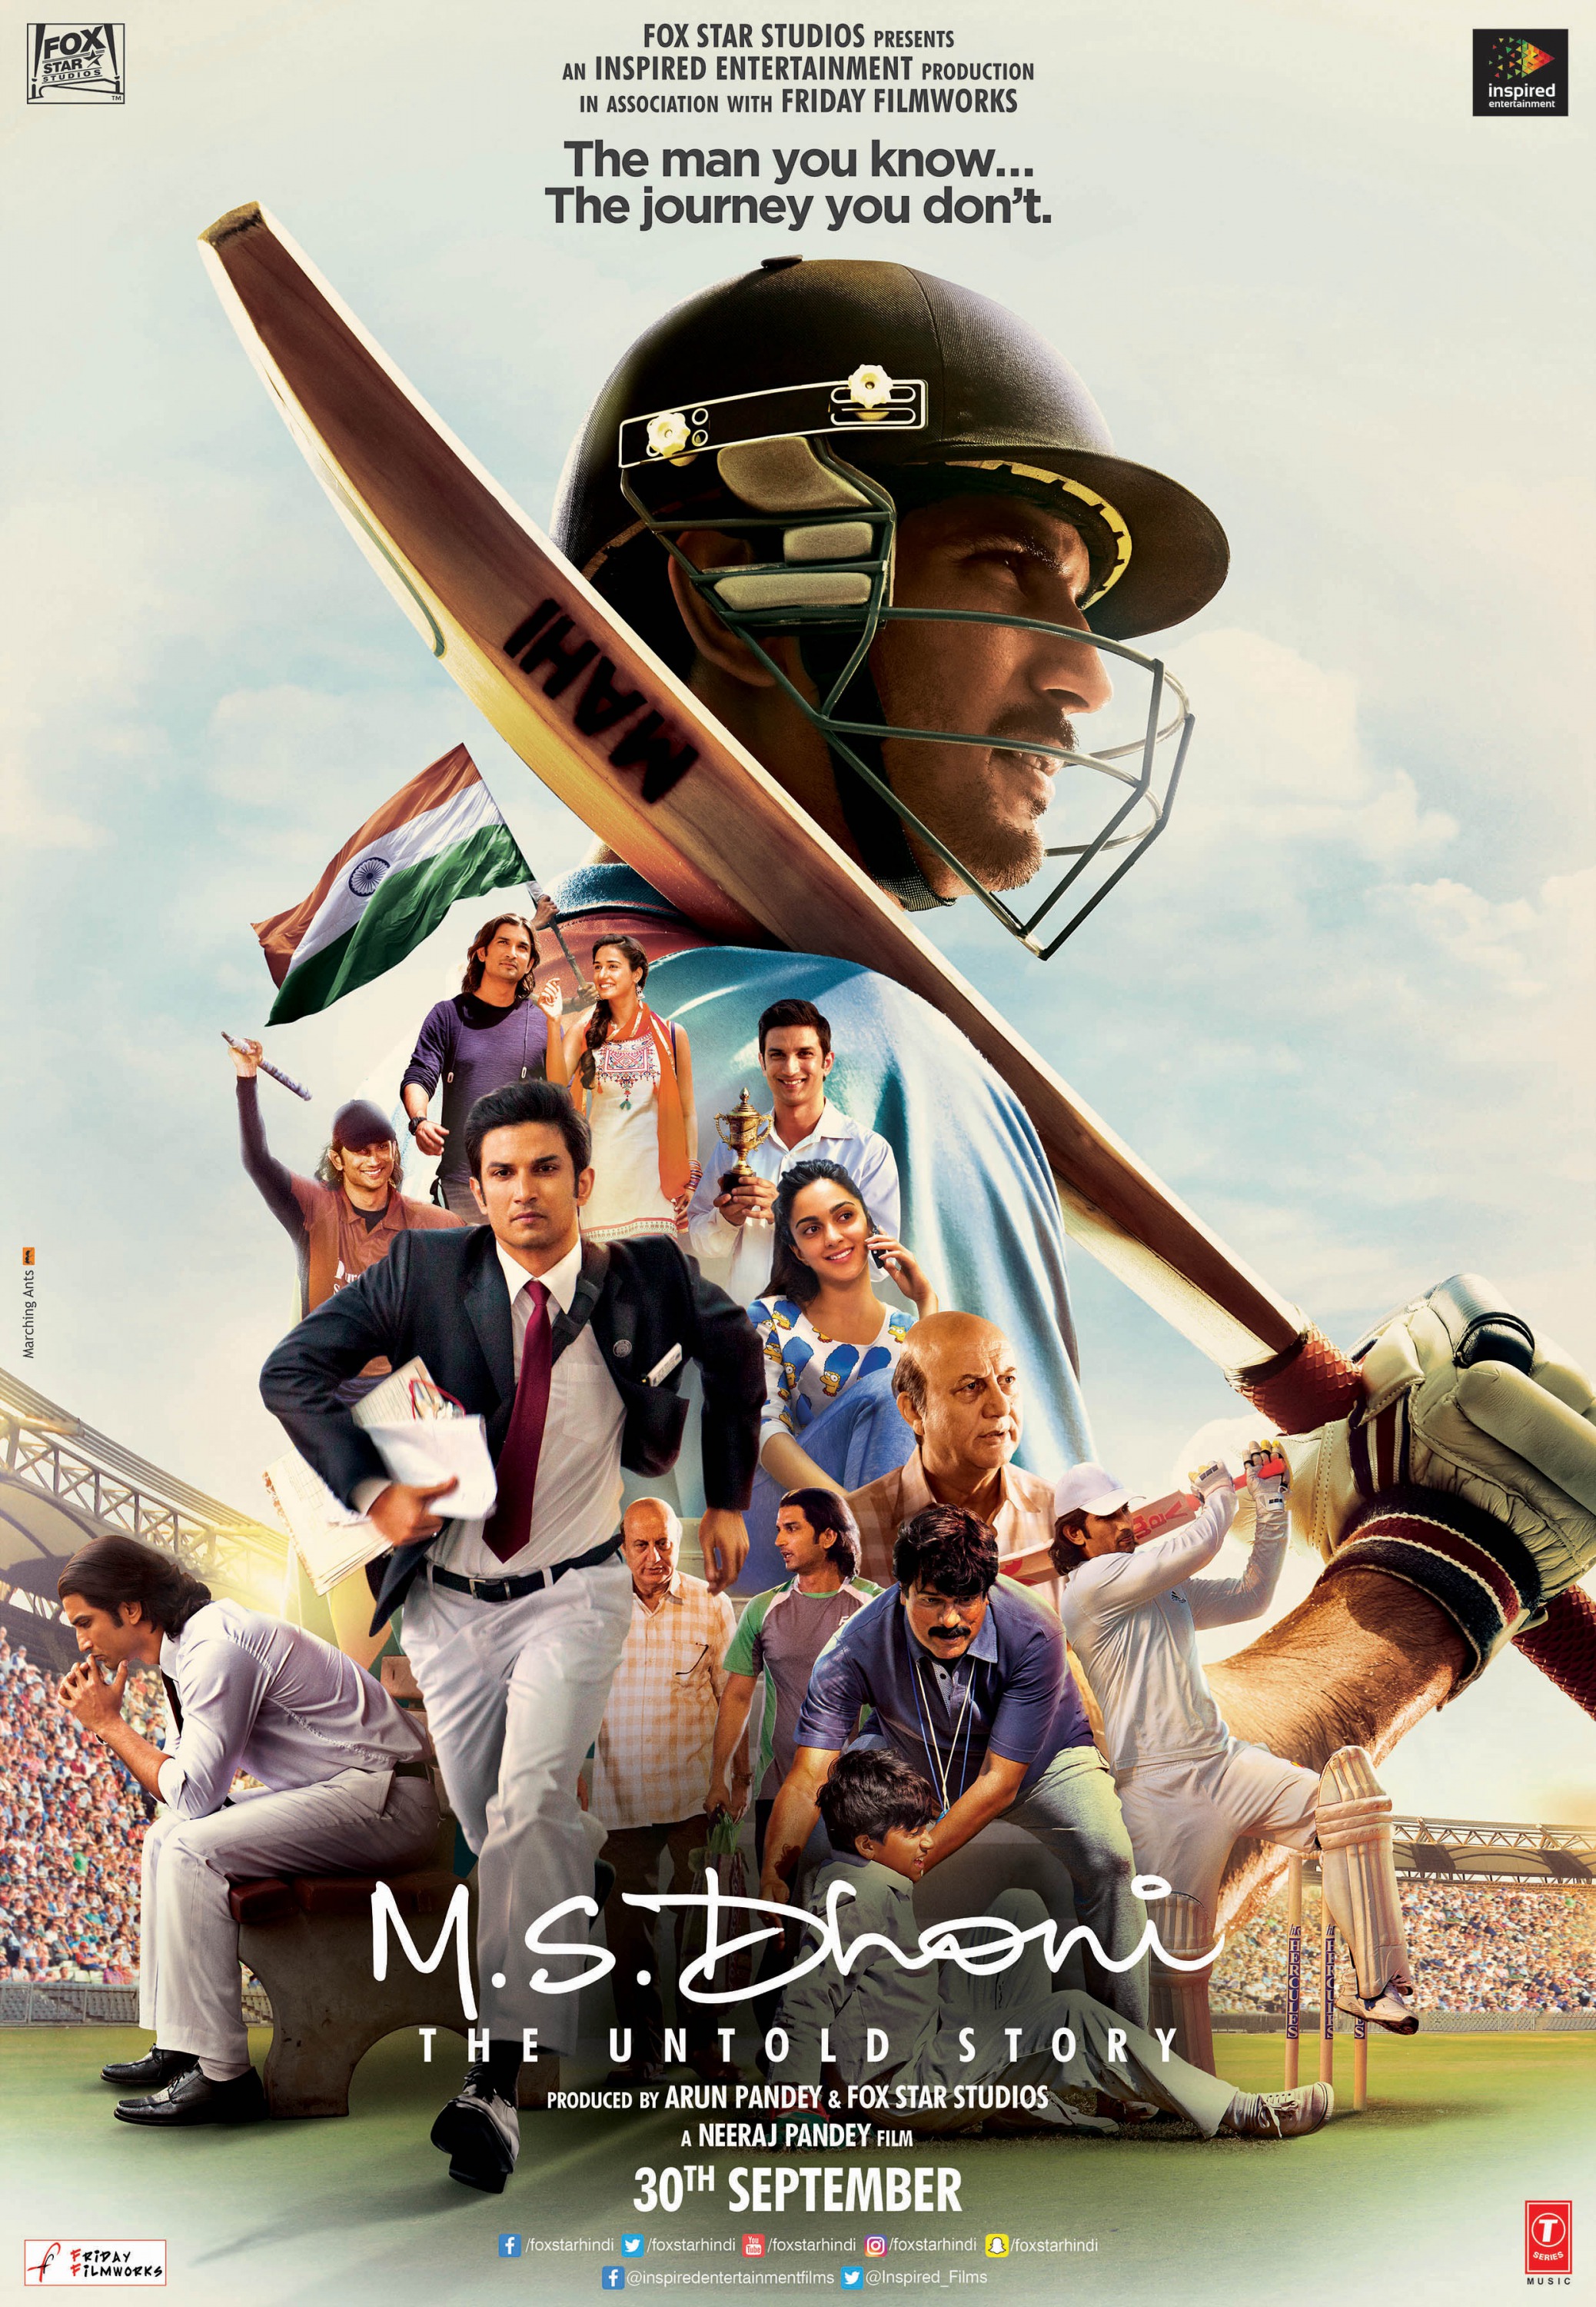 Who acted as the lead character of the movie, MS Dhoni the untold story?